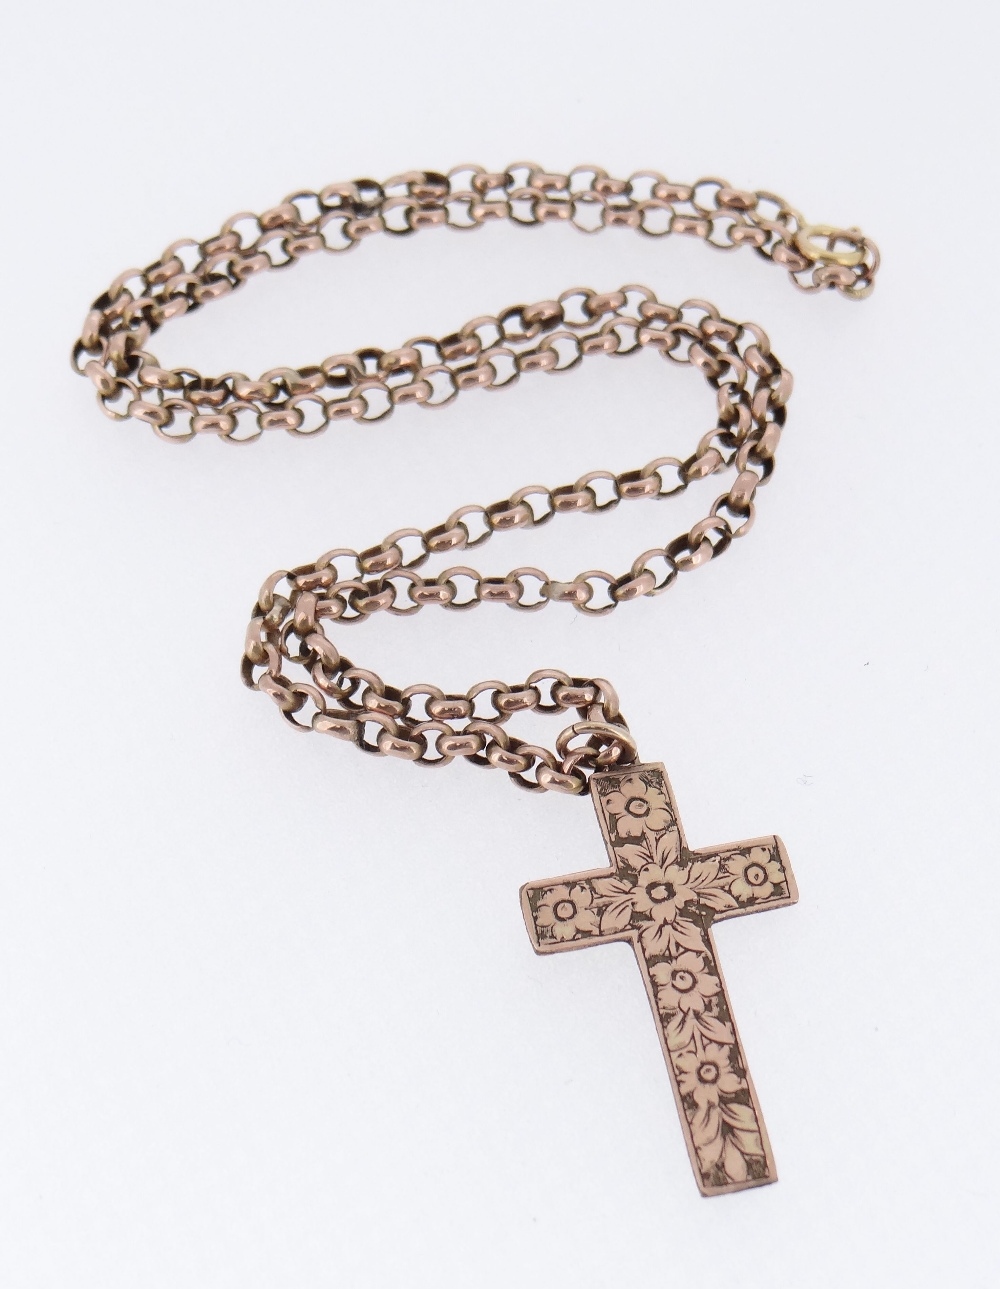 FLORALLY ENGRAVED CROSS PENDANT on 9ct gold chain, the chain weighing 6.9gms - Image 3 of 9